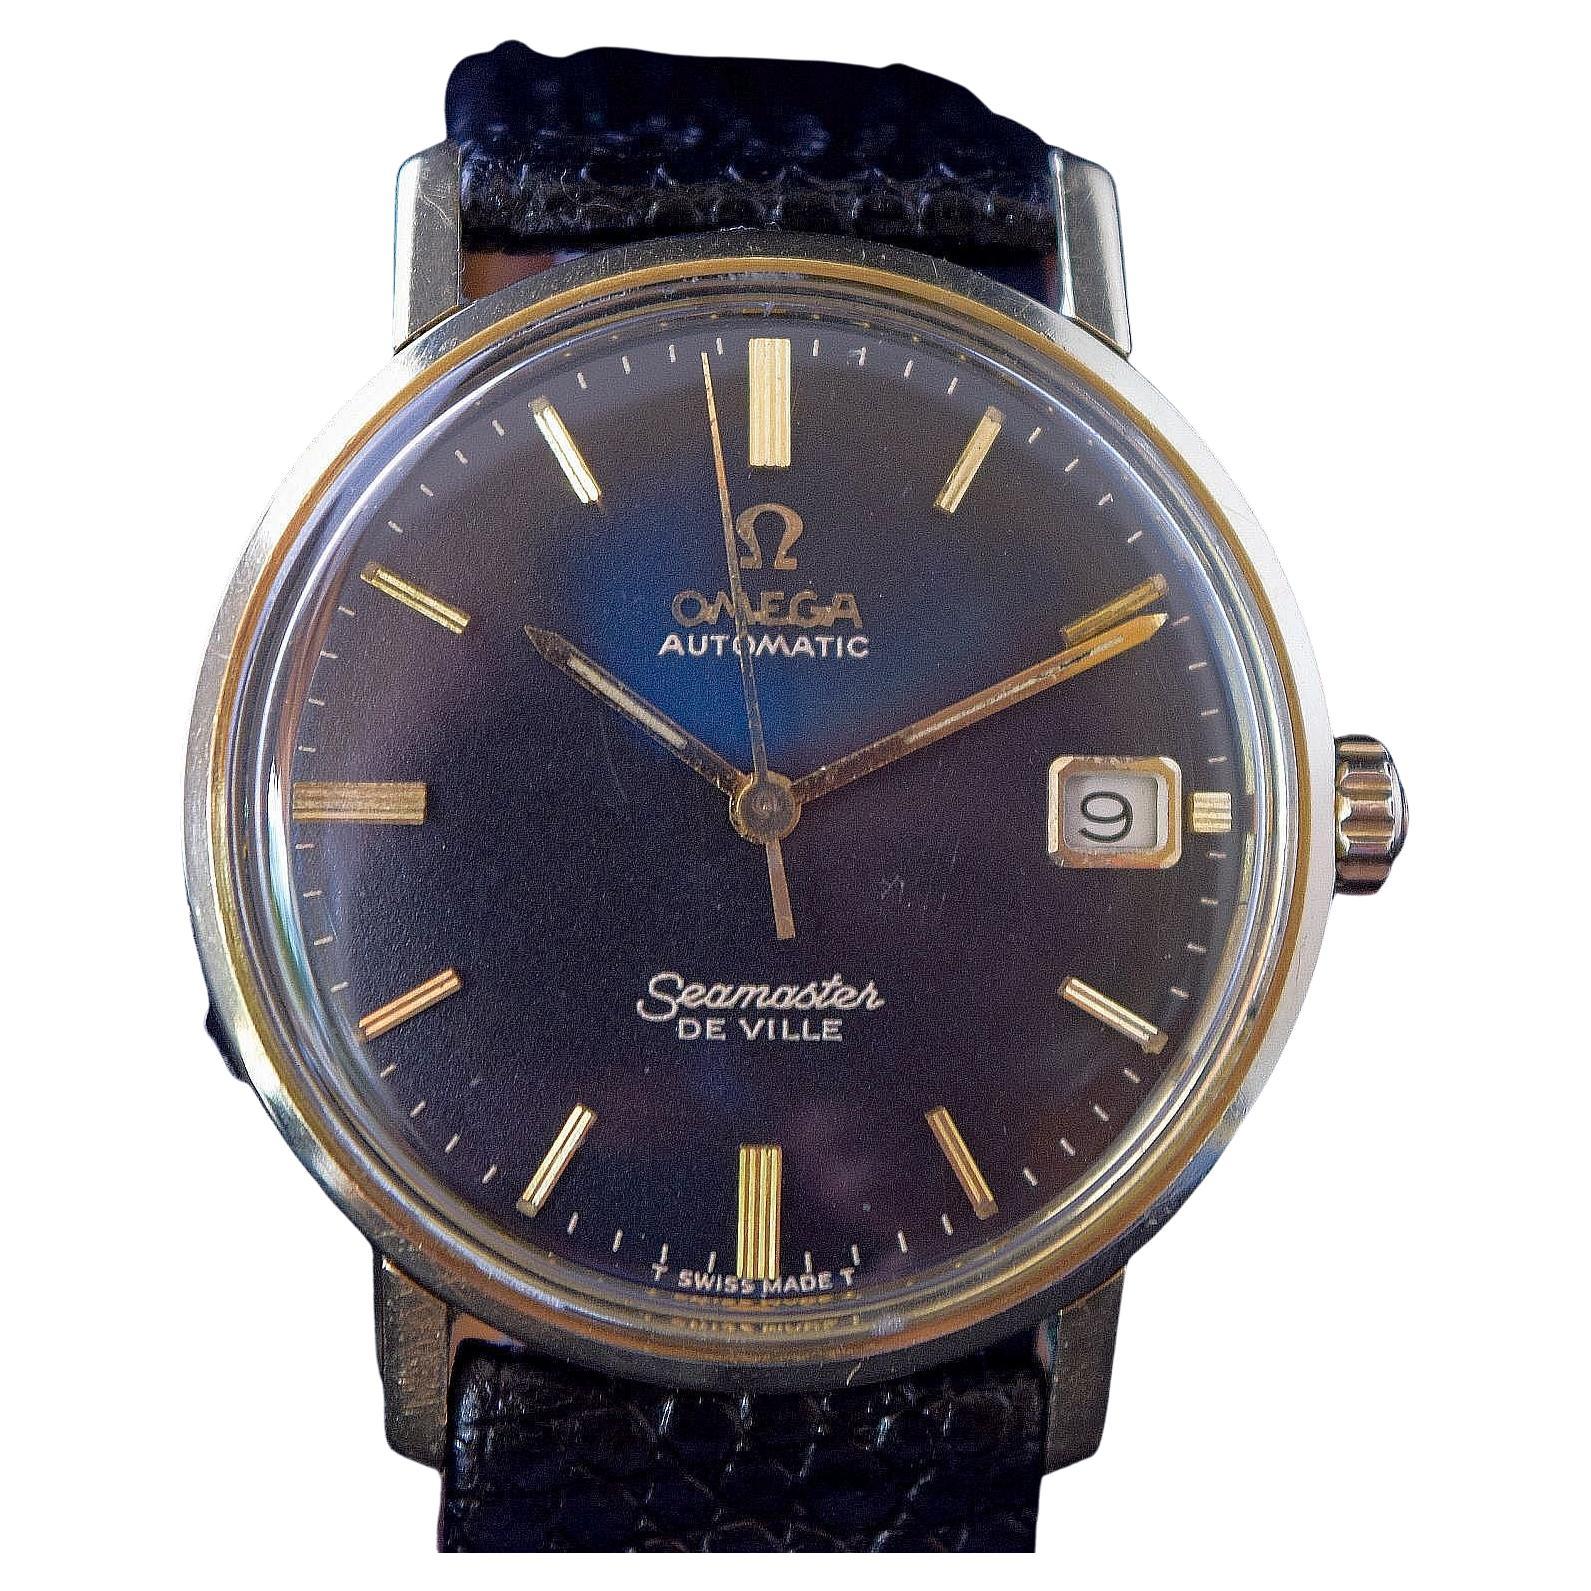 Omega Sea Master De Ville Black Dial Date
Automatic Gold capped case with steel back
This is a very sought after model and is in wonderful condition
Dial is signed Omega Sea master Automatic De Ville
Raised gold markers Raised Omega emblem
Gold